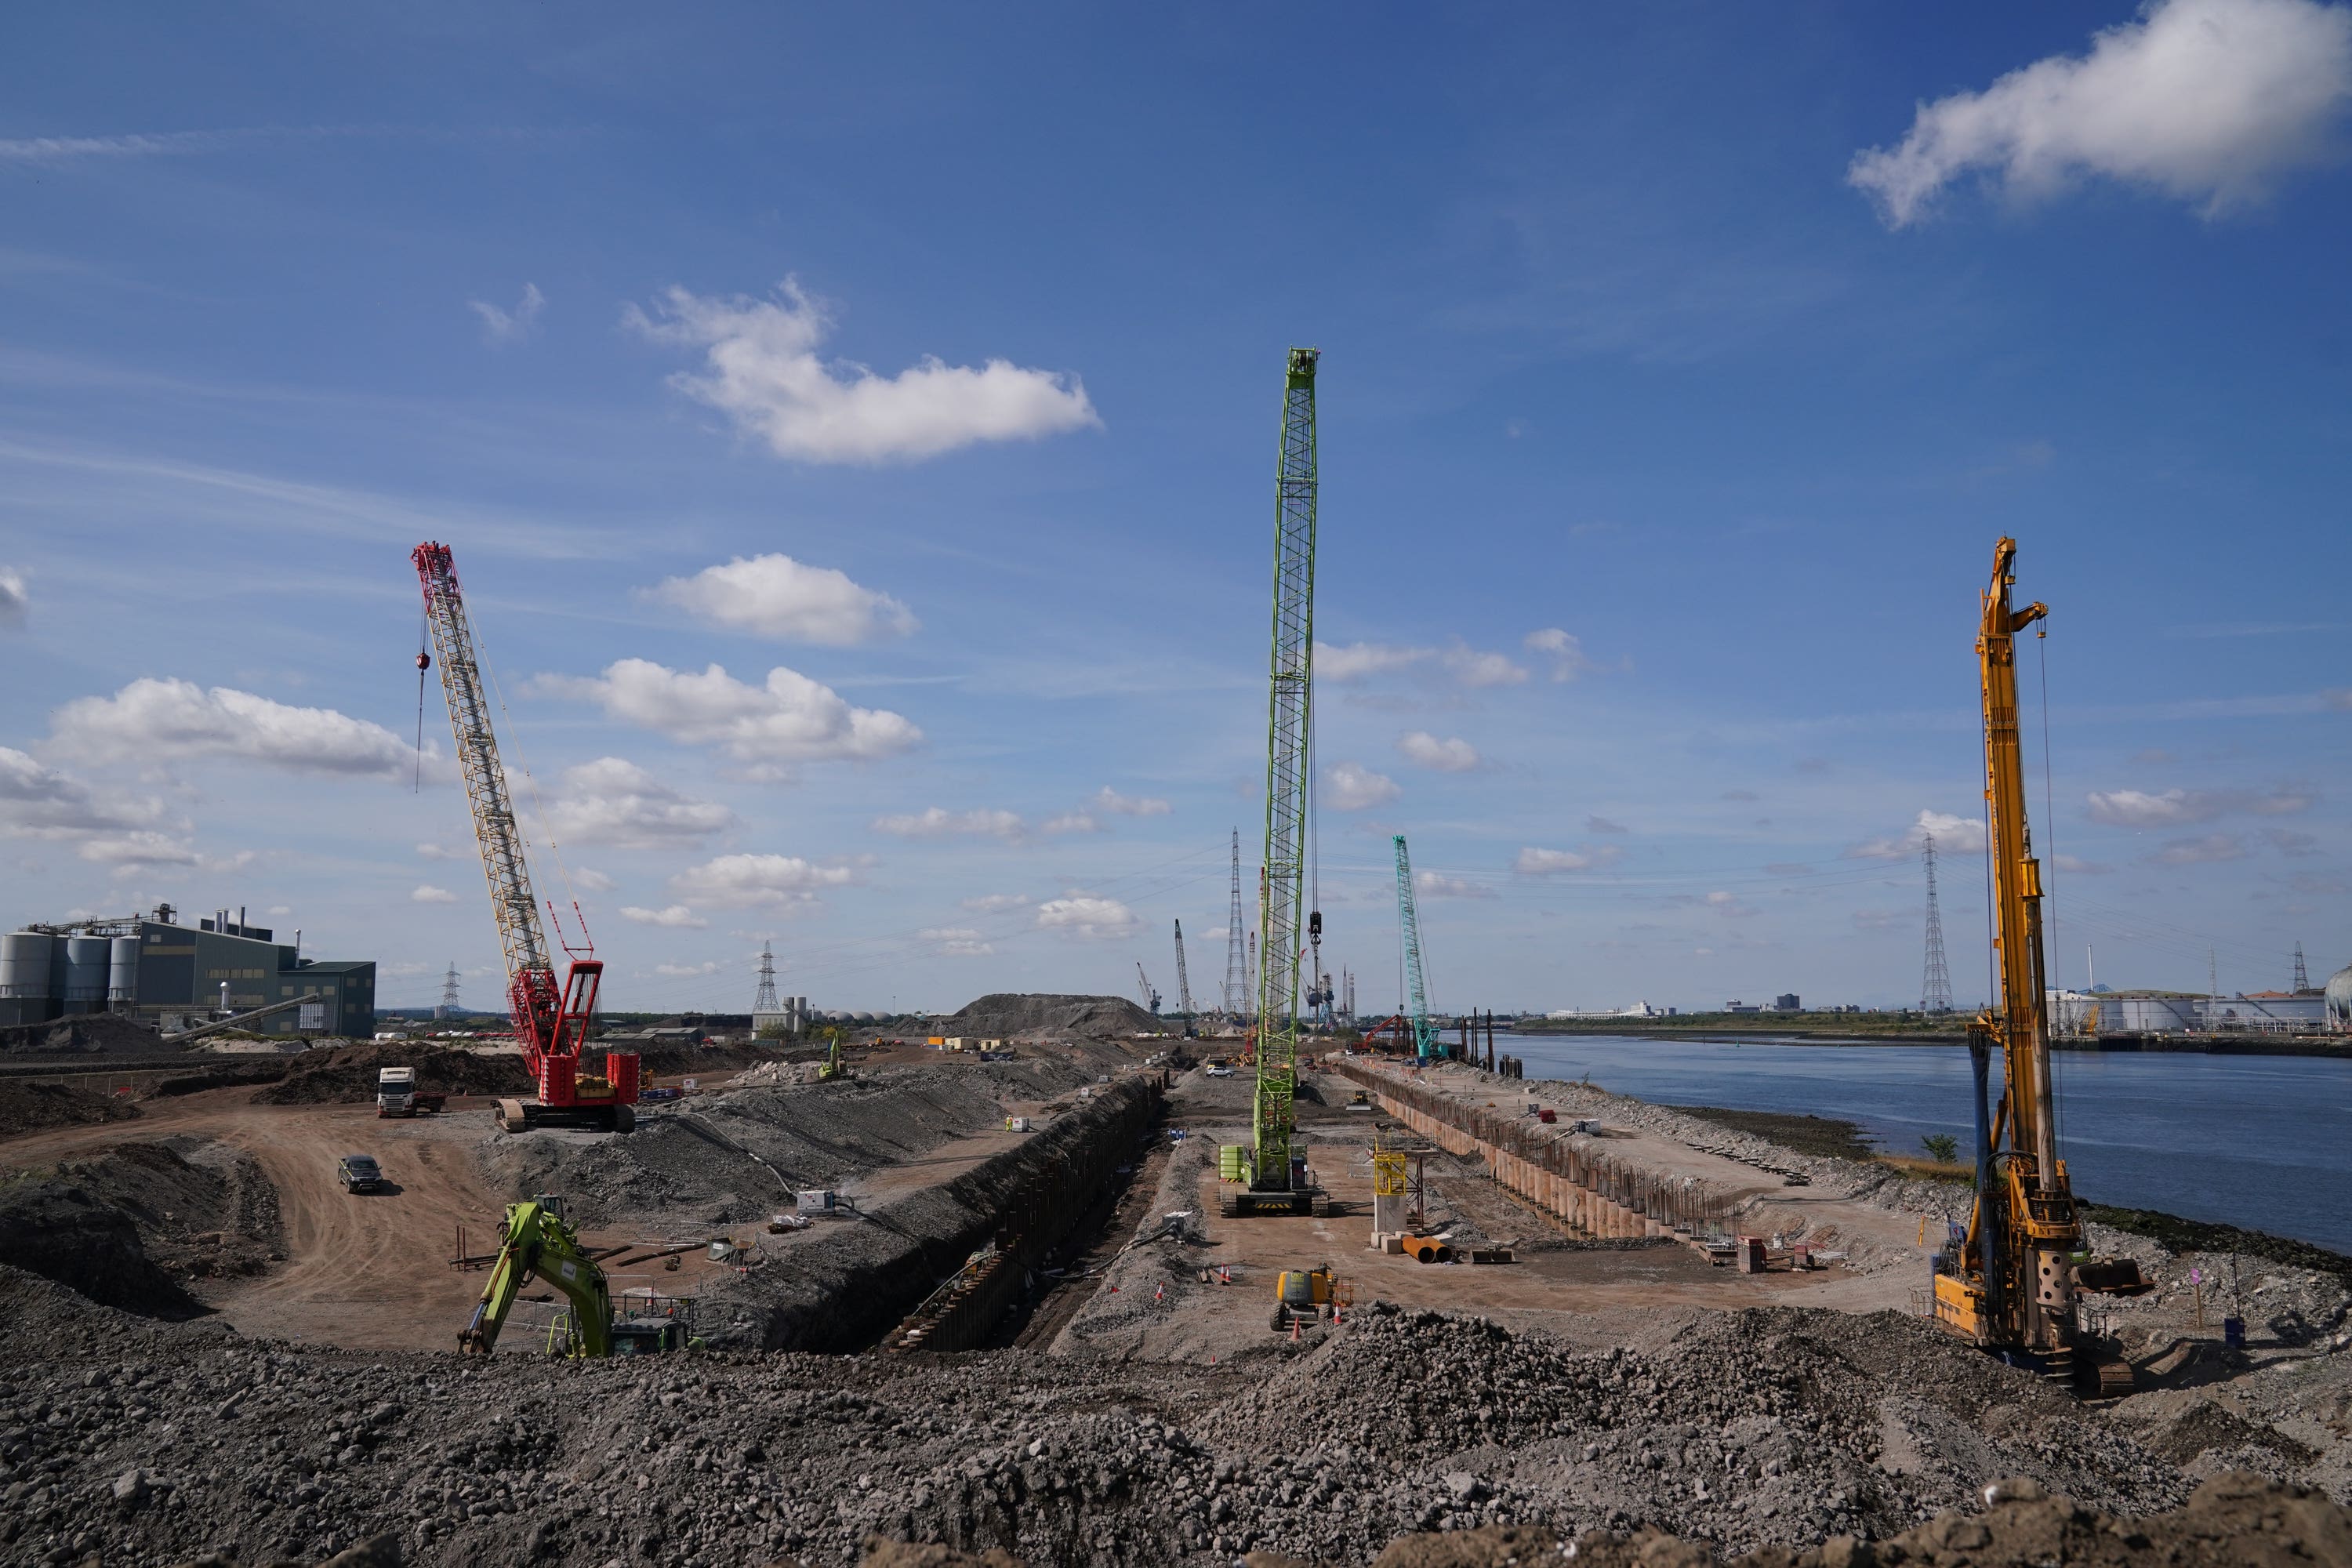 A view of the construction site at Teesside freeport, Teesworks, in Redcar